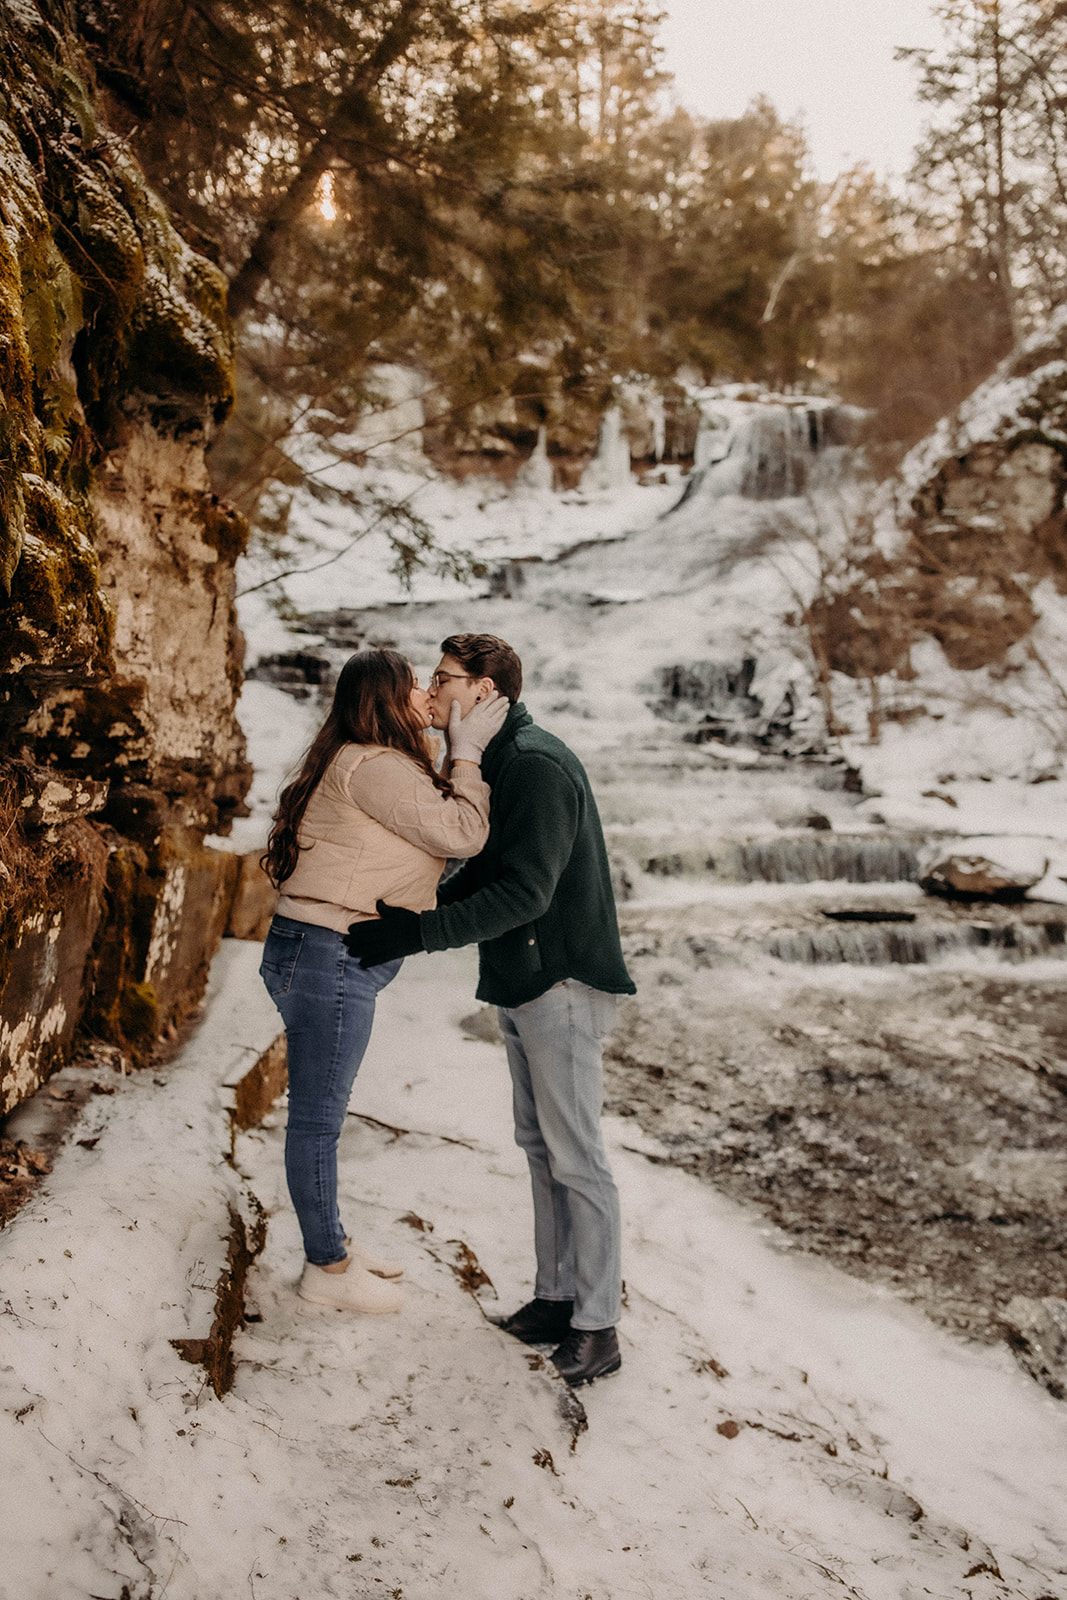 Couple share a kiss in the snow during their winter engagement photoshoot!!